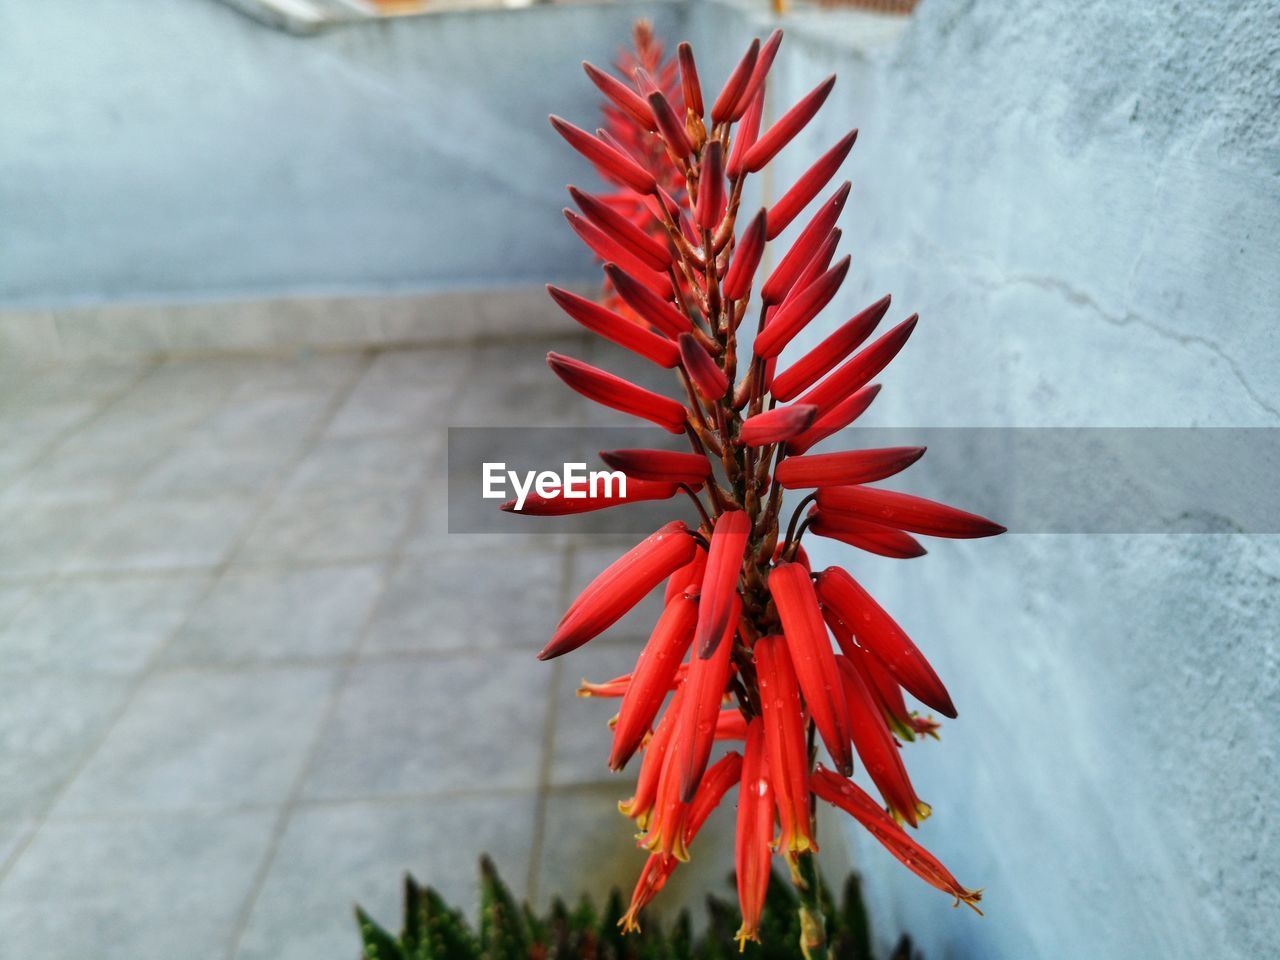 HIGH ANGLE VIEW OF RED FLOWERING PLANT AGAINST WALL